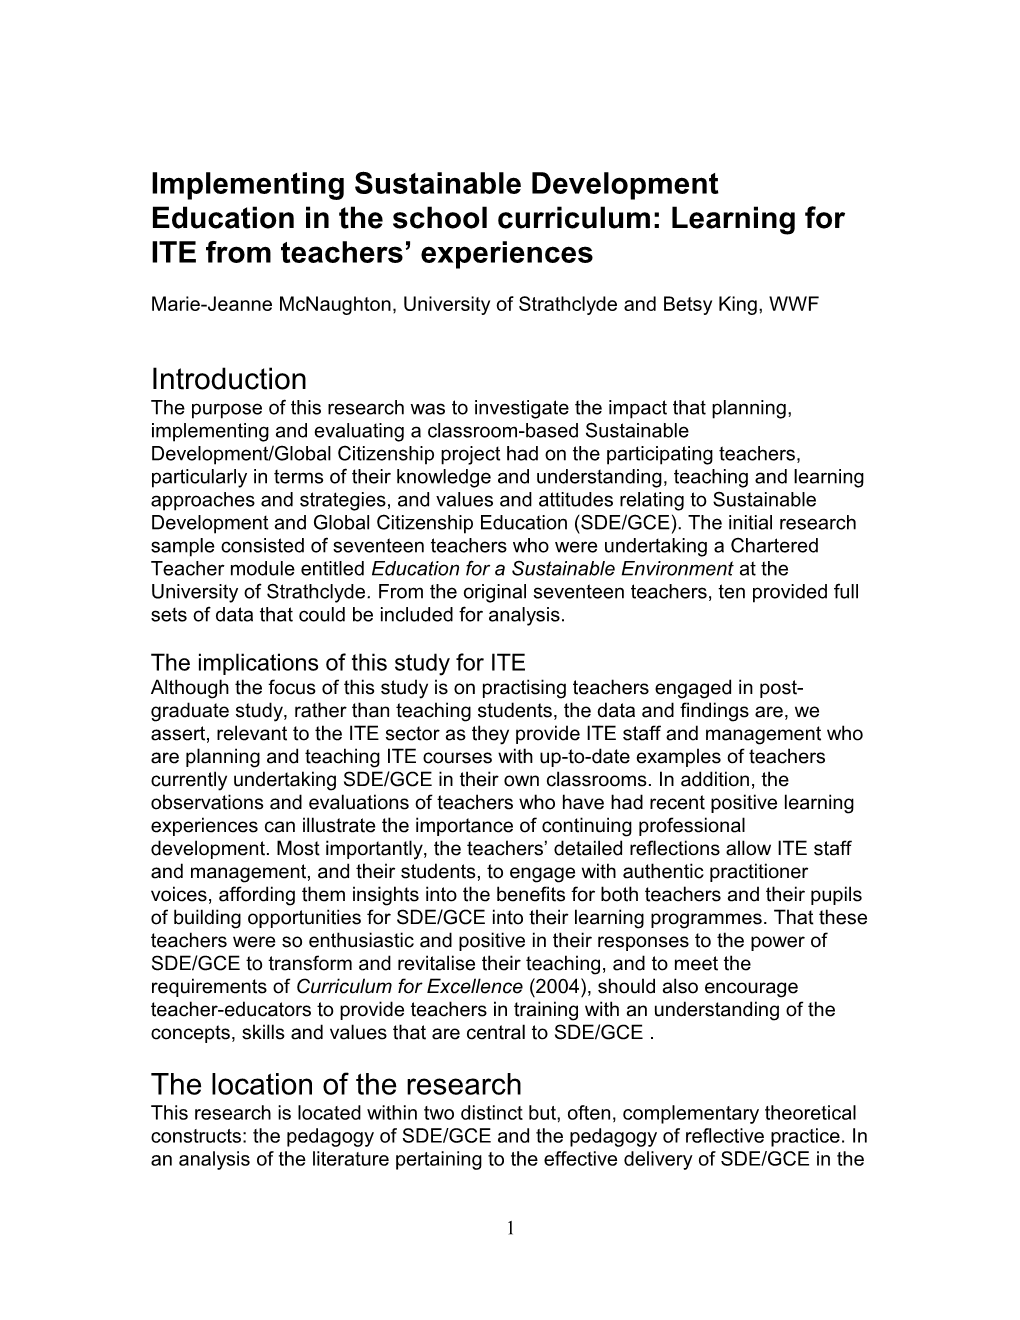 Implementing Sustainable Development Education in the School Curriculum: Learning For